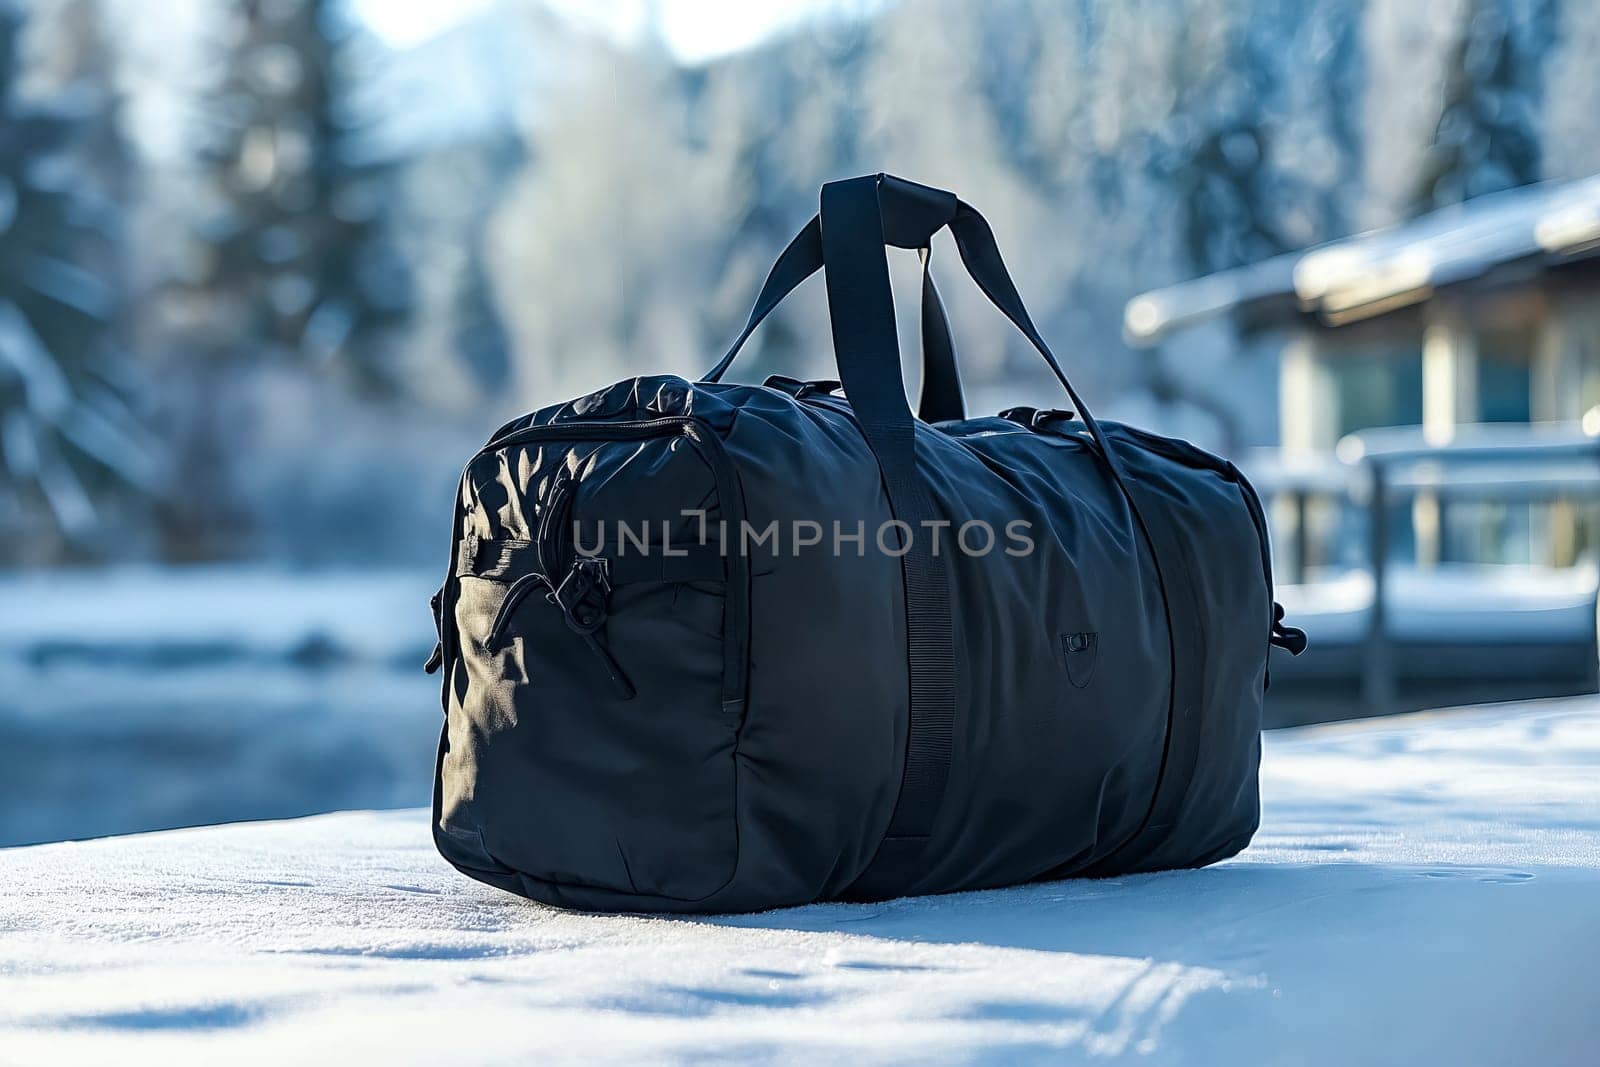 A black duffle bag is sitting on a snowy surface. The bag is large and has a black strap. The scene is peaceful and serene, with the snow-covered ground and the bag creating a sense of calmness. Generative AI